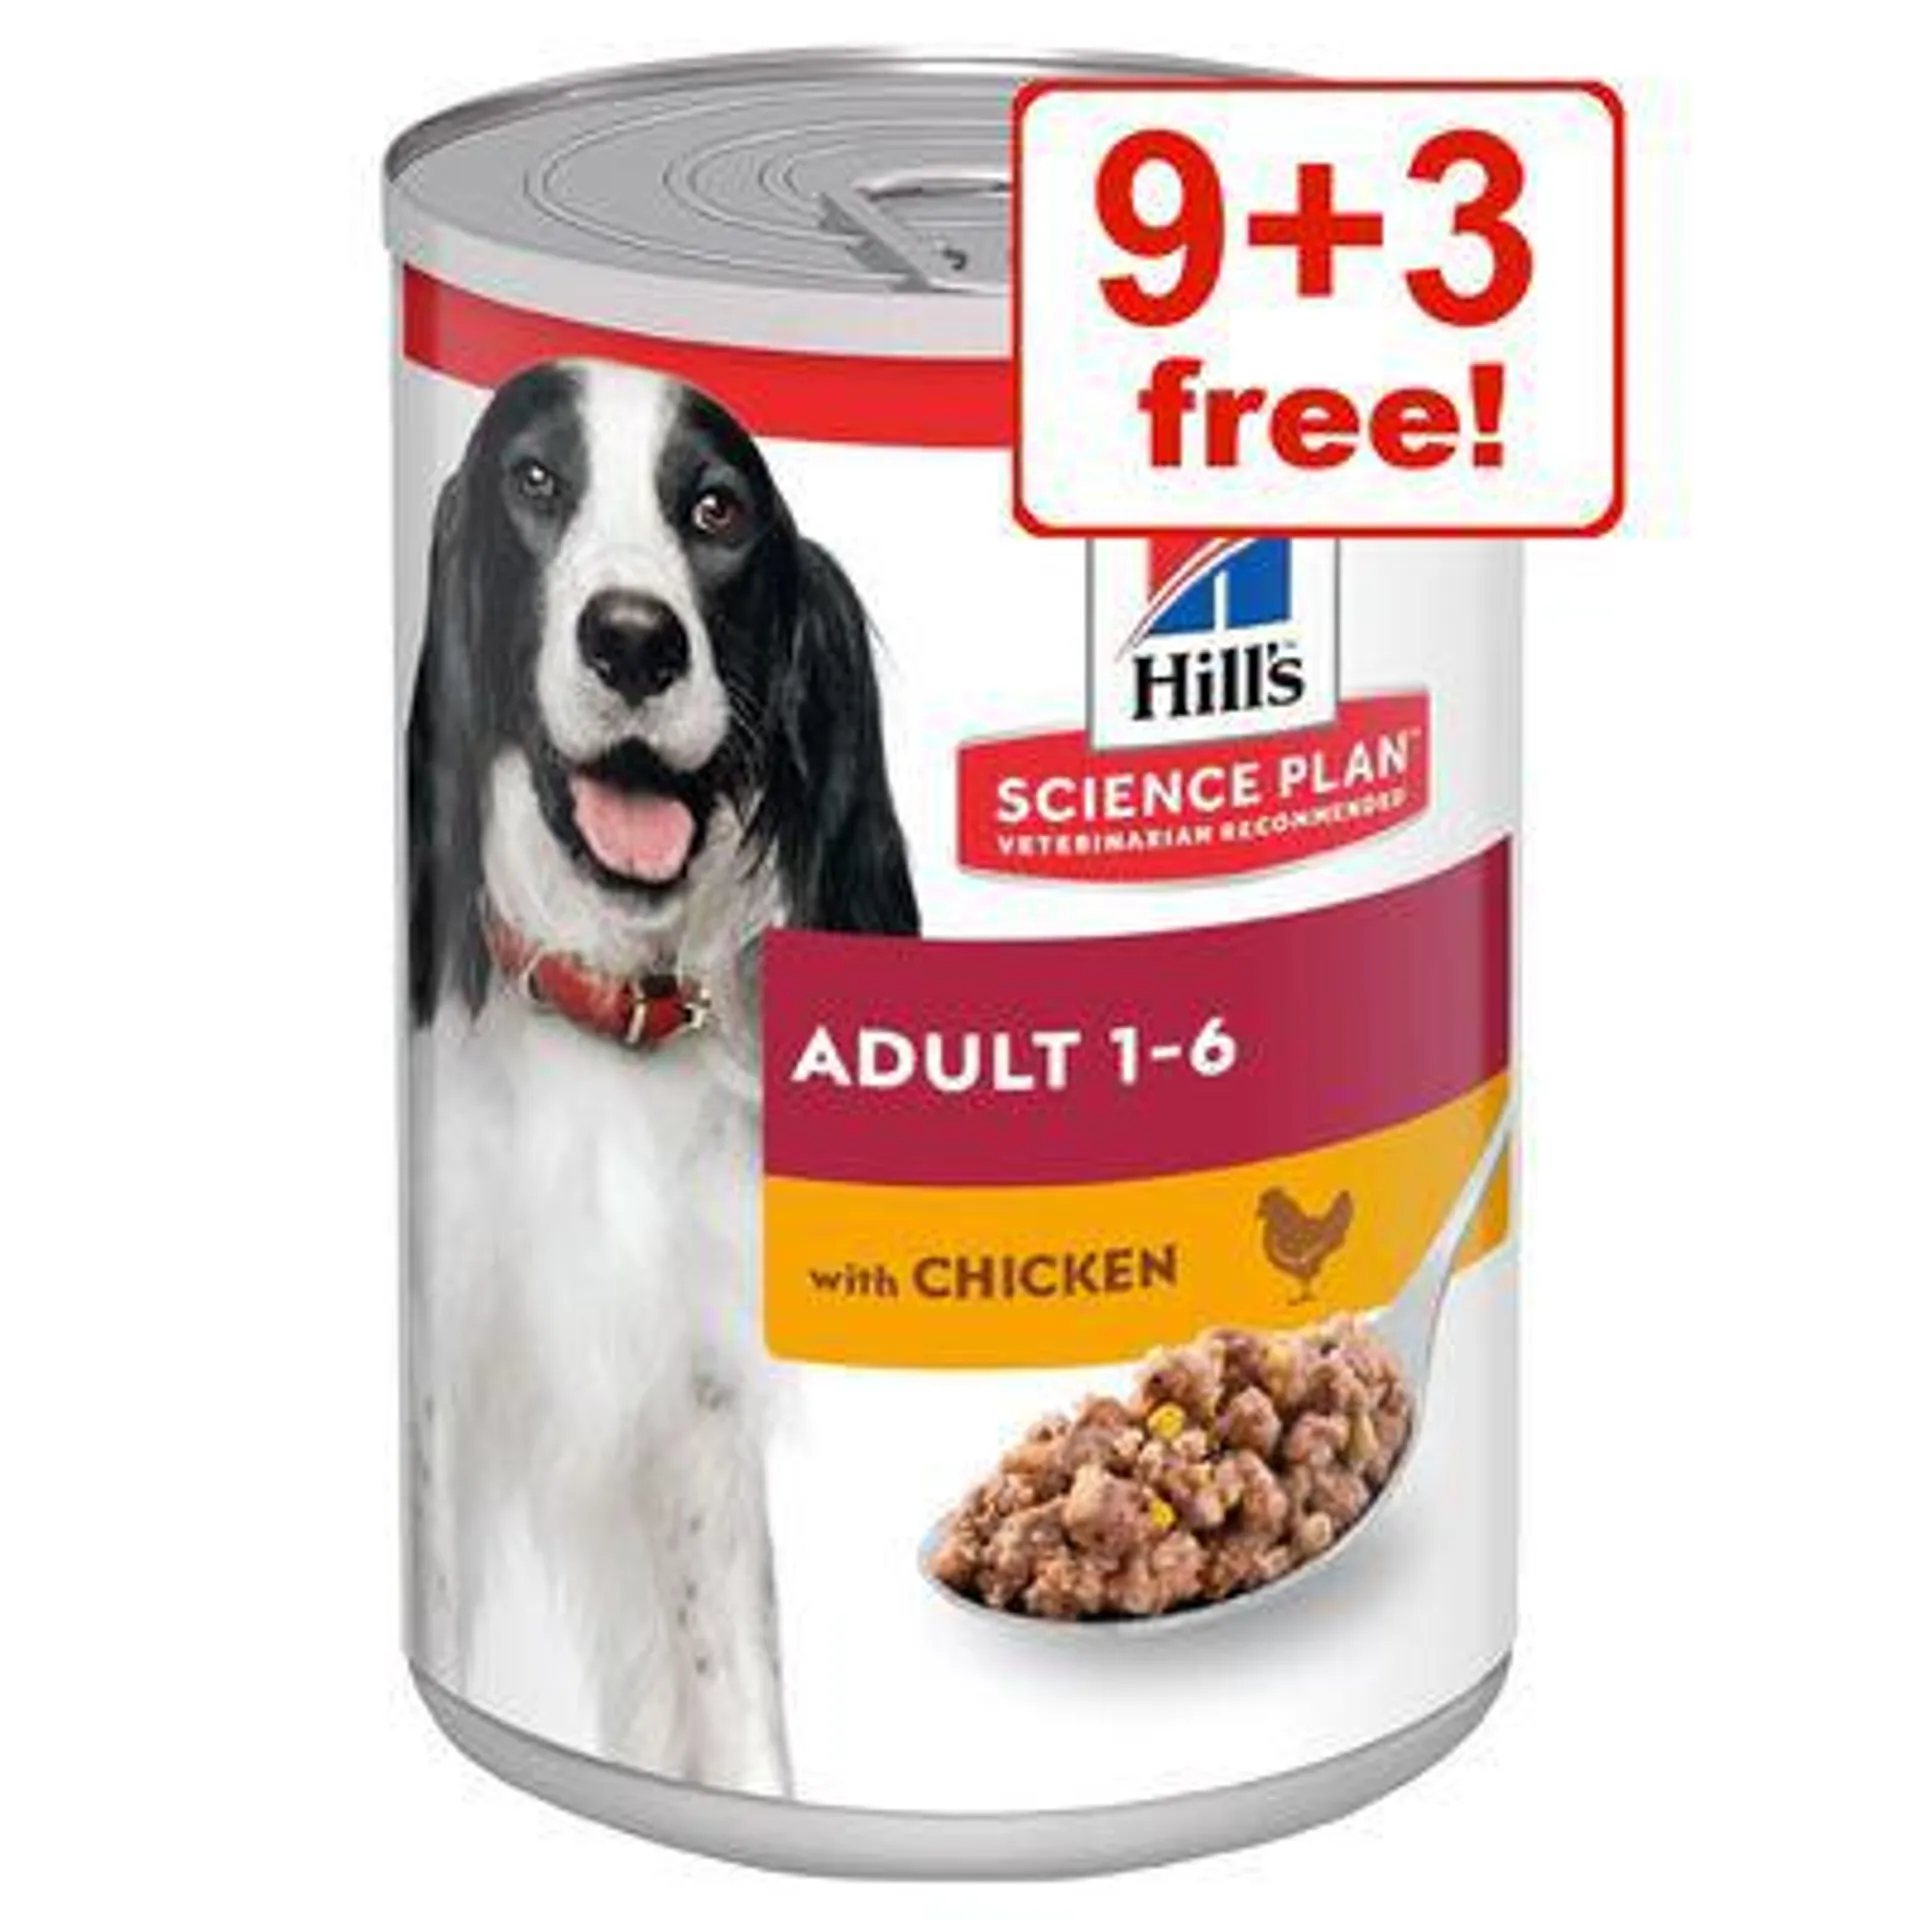 12 x 370g Hill's Science Plan Wet Dog Food - 9 + 3 Free!*